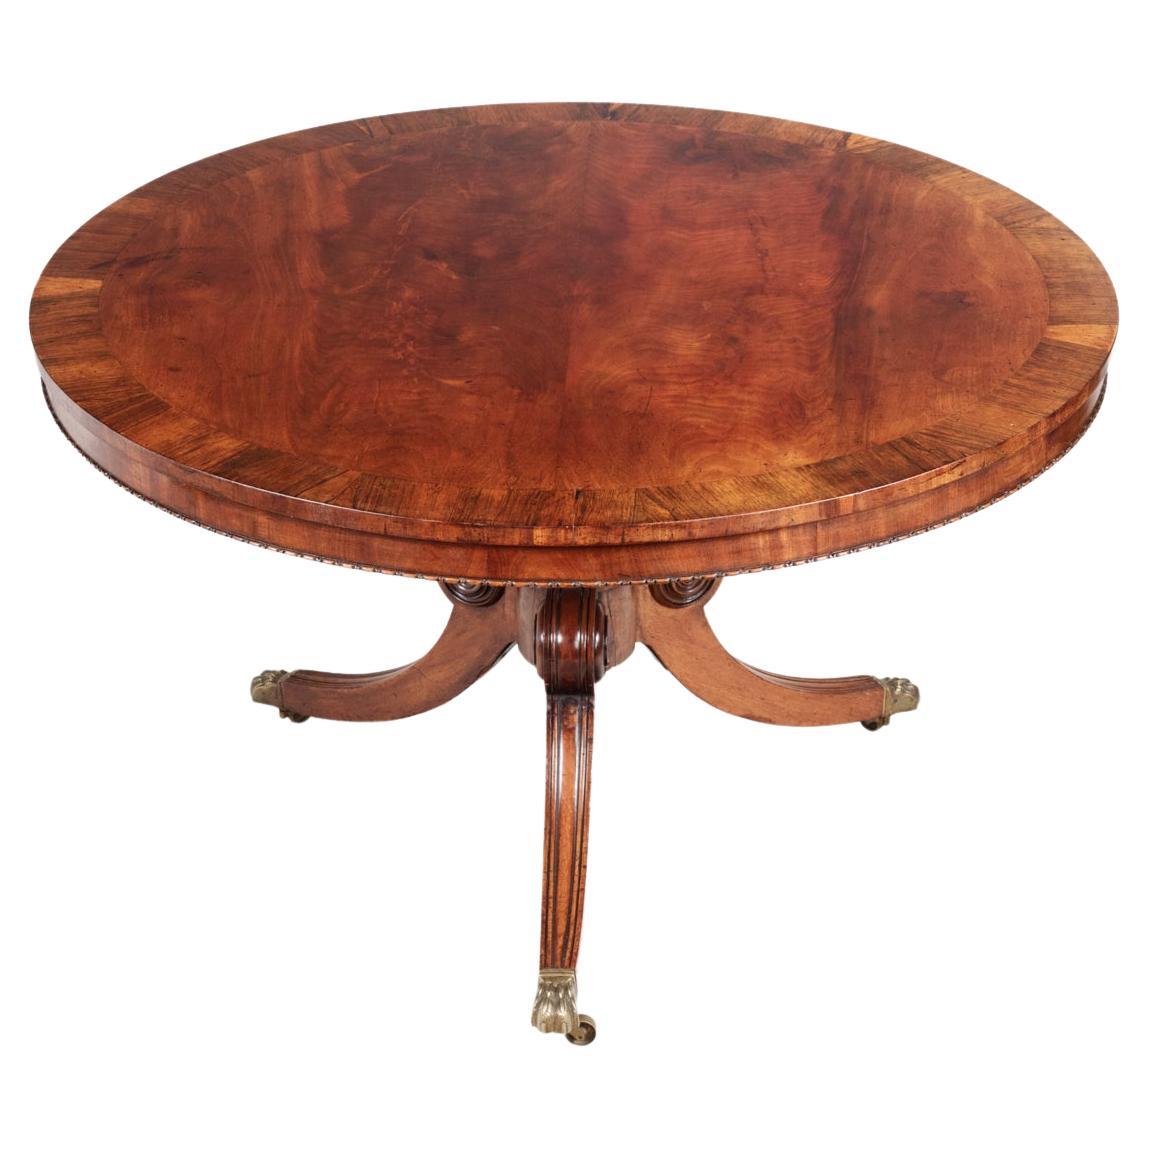 19th Century Mahogany & Rosewood Tip-Up Dining Table